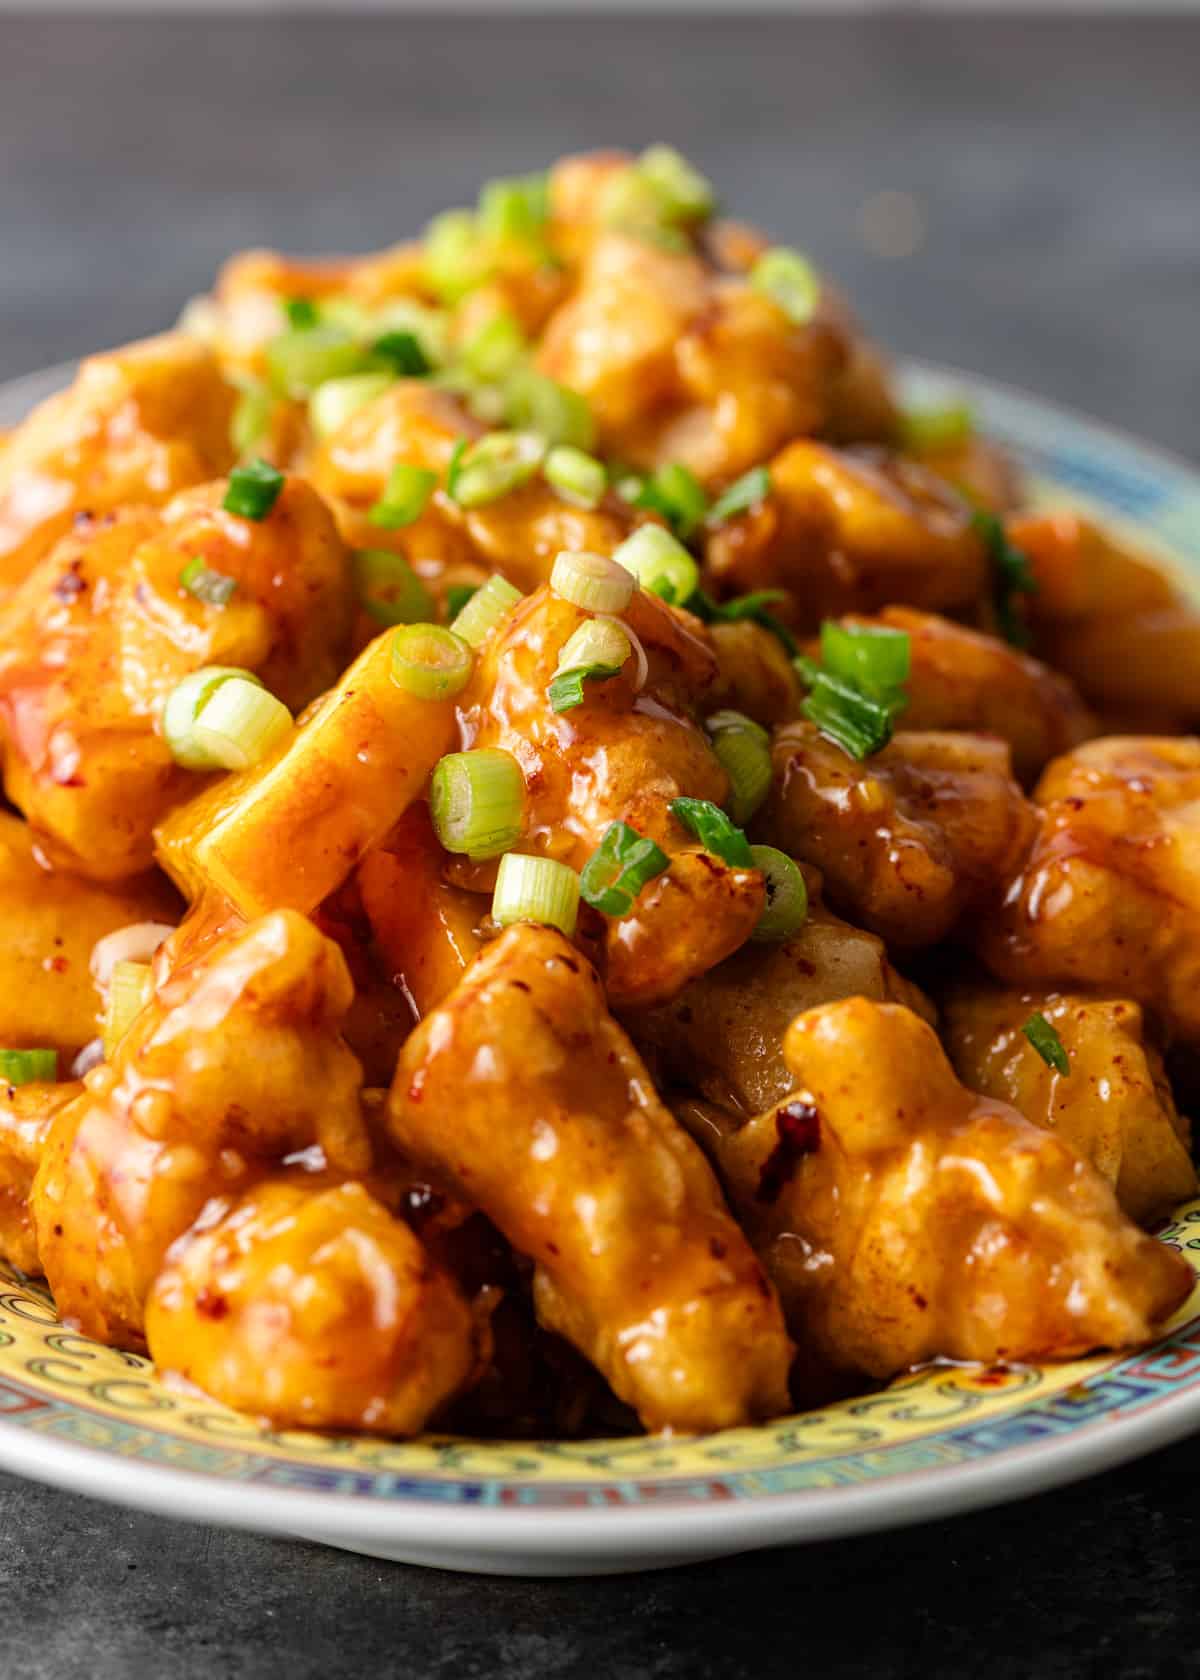 closeup: a heaping pile of orange chicken with sticky sauce and sliced green onions